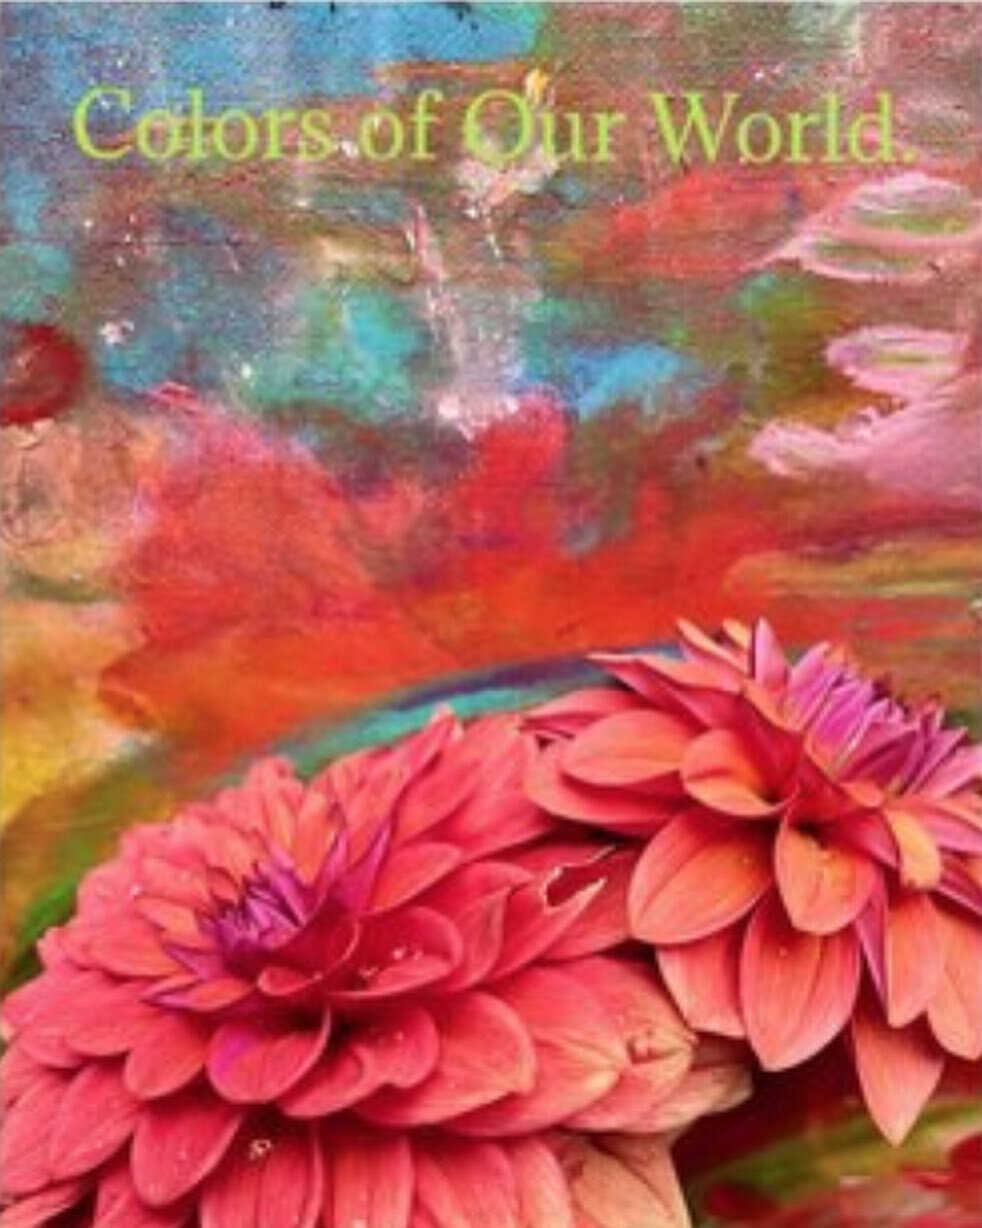 Art Reception for Jenny Noonan
and Robin B. Langsdorf

  Saturday ~ August 26, 5 - 7 pm

Colors of Our World

For some time Jenny and Robin have enjoyed a warm and engaging friendship here on Block Island. Several years ago, Jenny started painting th